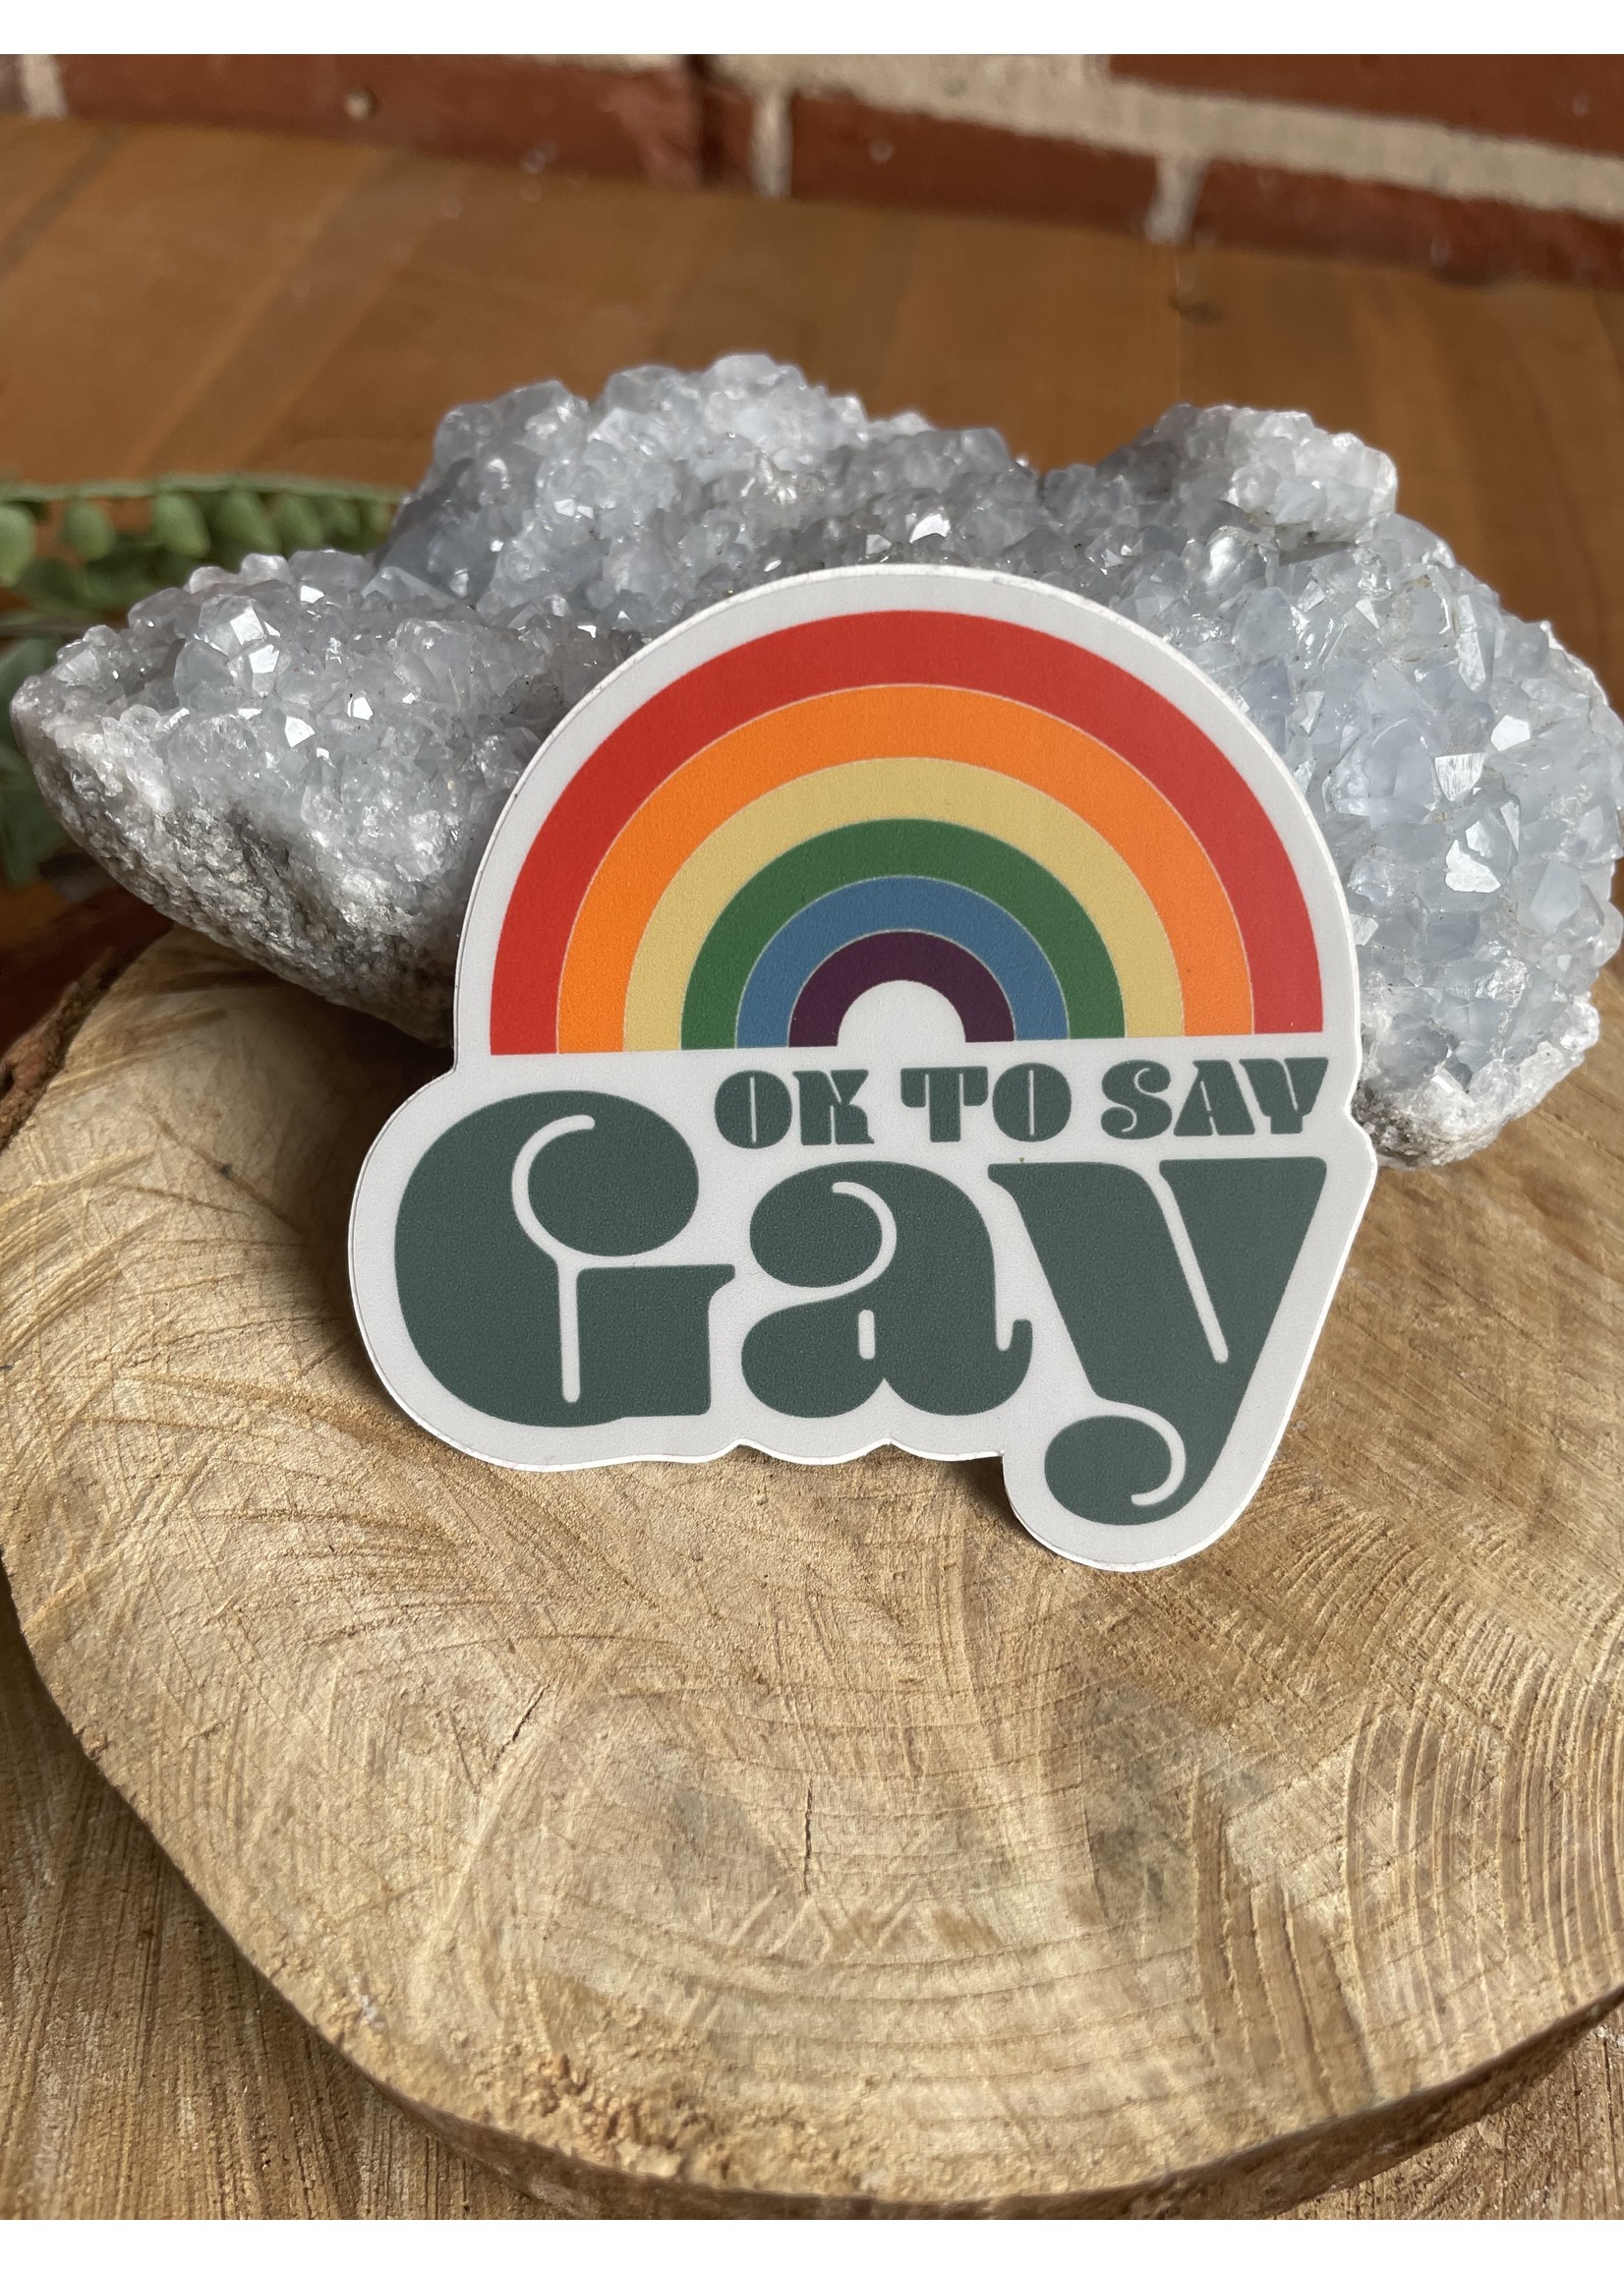 Tangled Up In Hue Wholesale Sticker - Okay To Say Gay